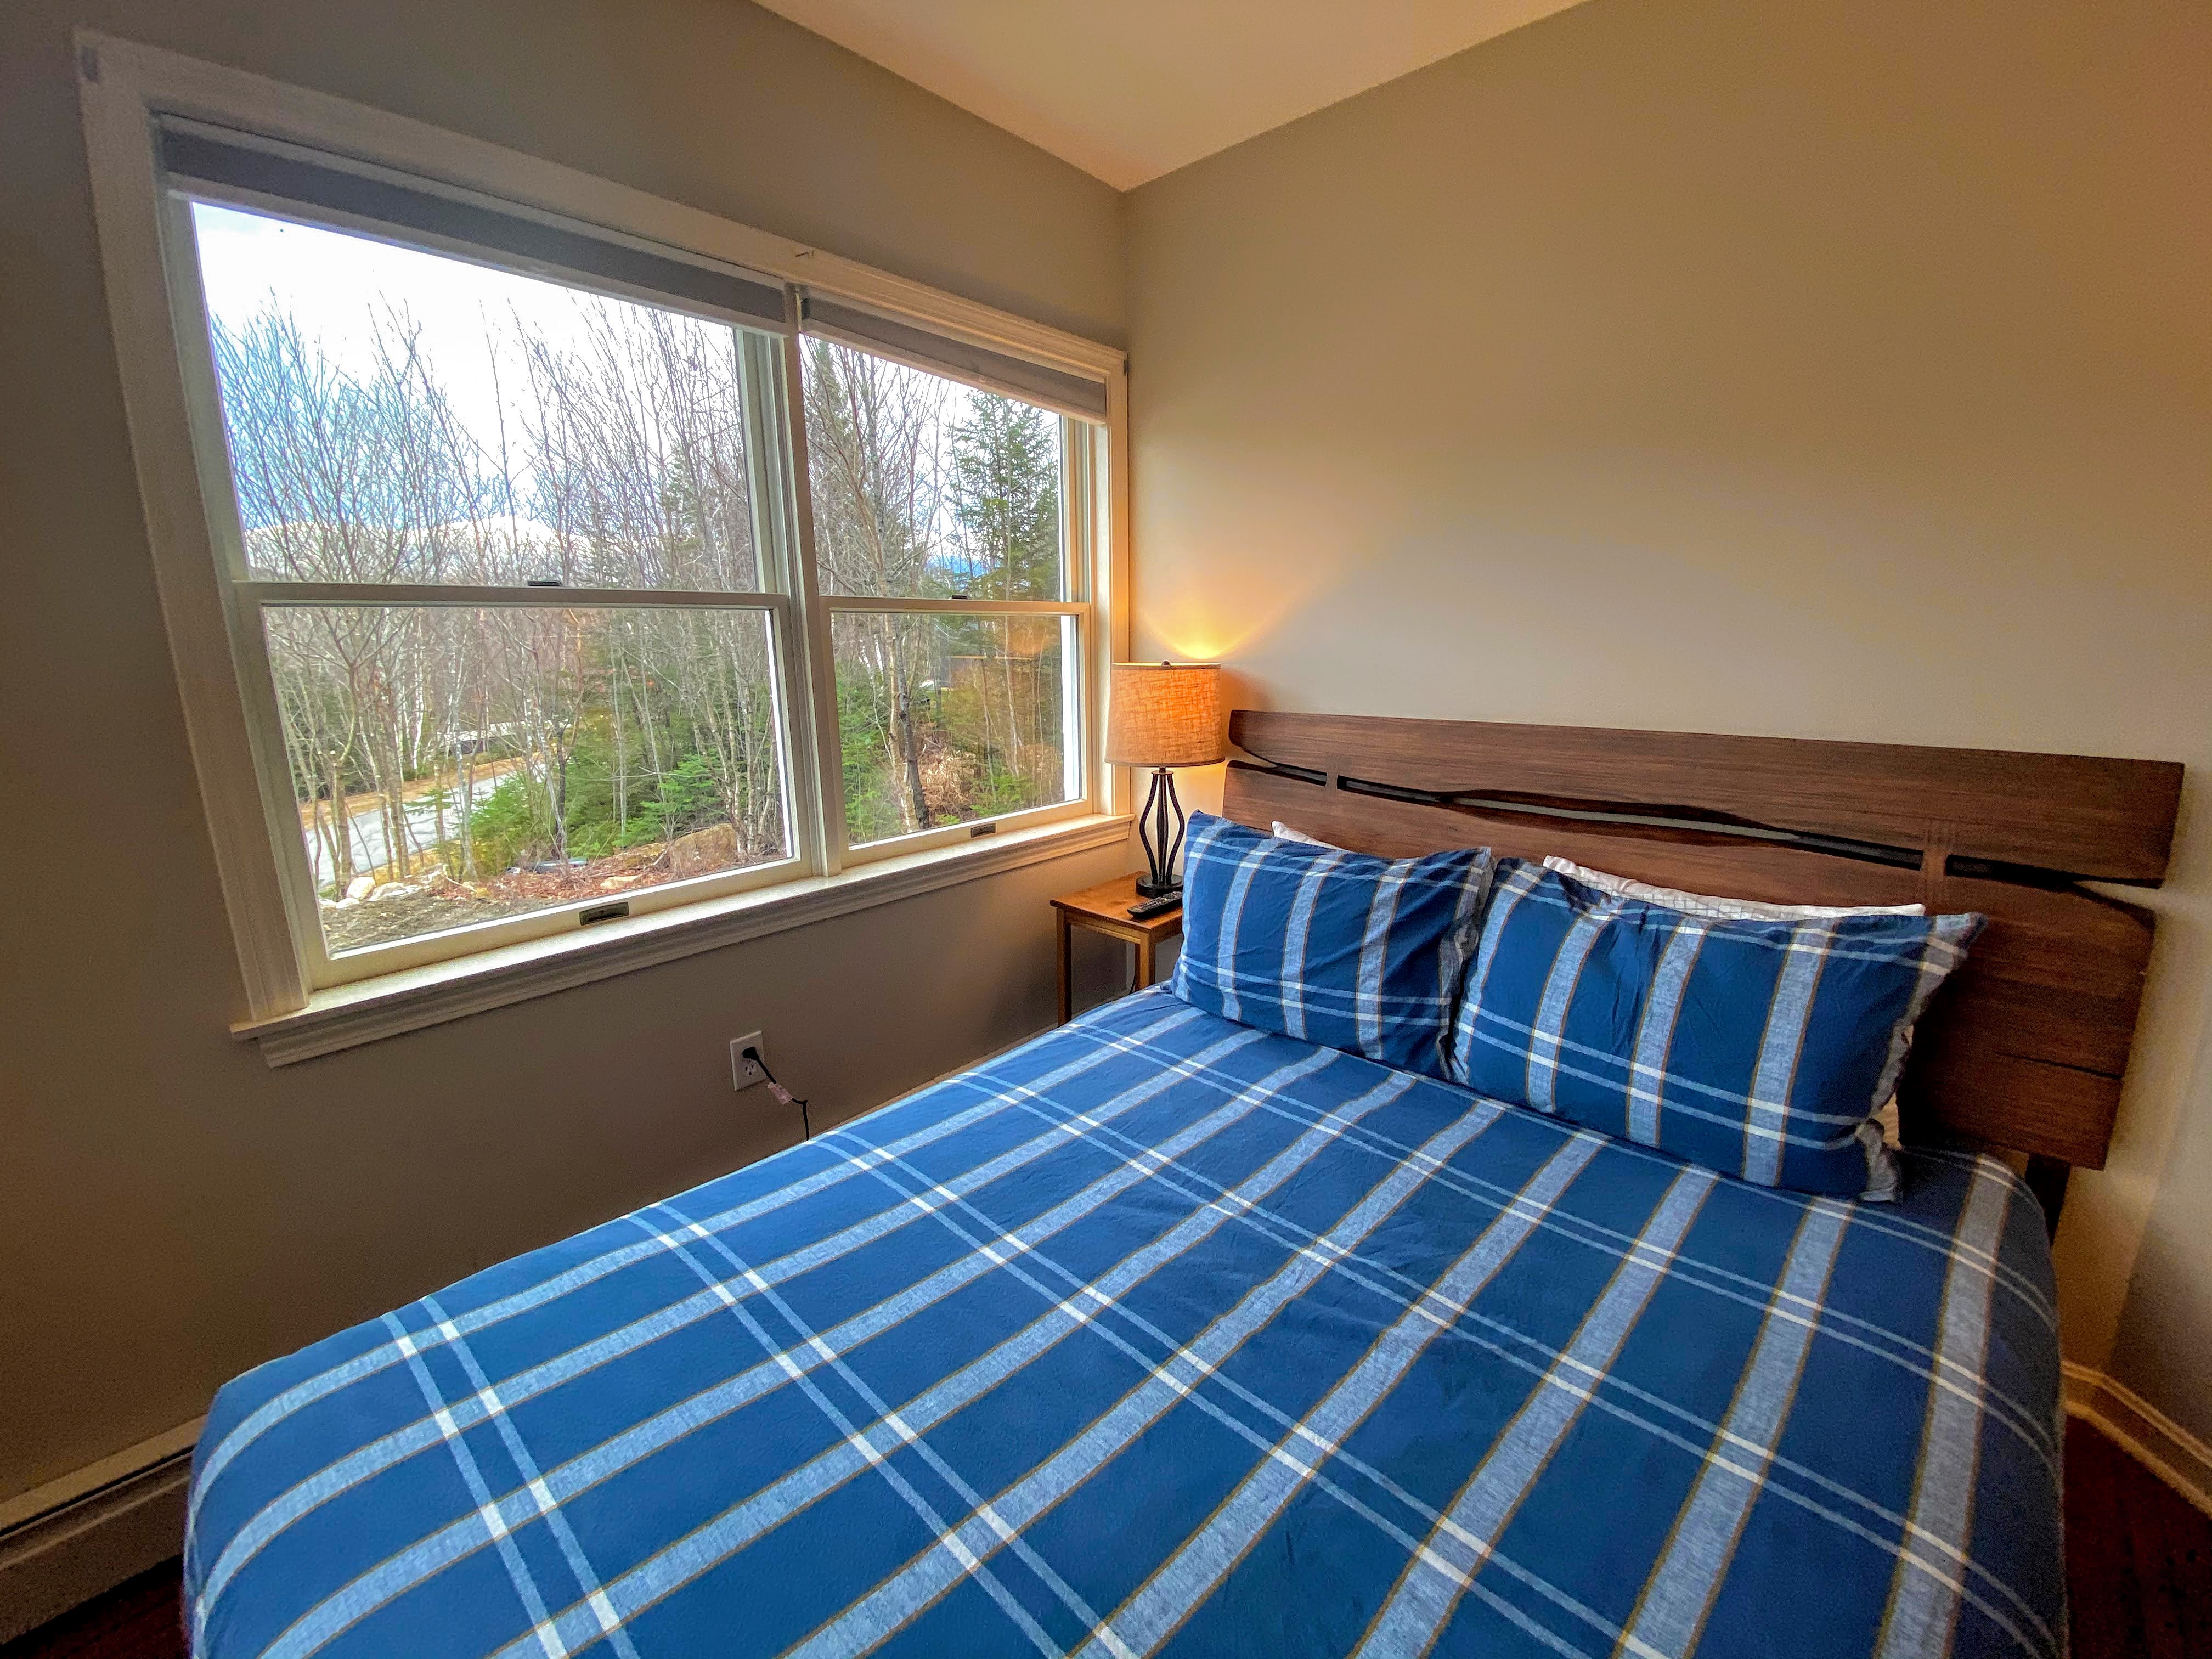 RE79 Sunny Bretton Woods private home next to the slopes of Bretton Woods Hot Tub, Wifi